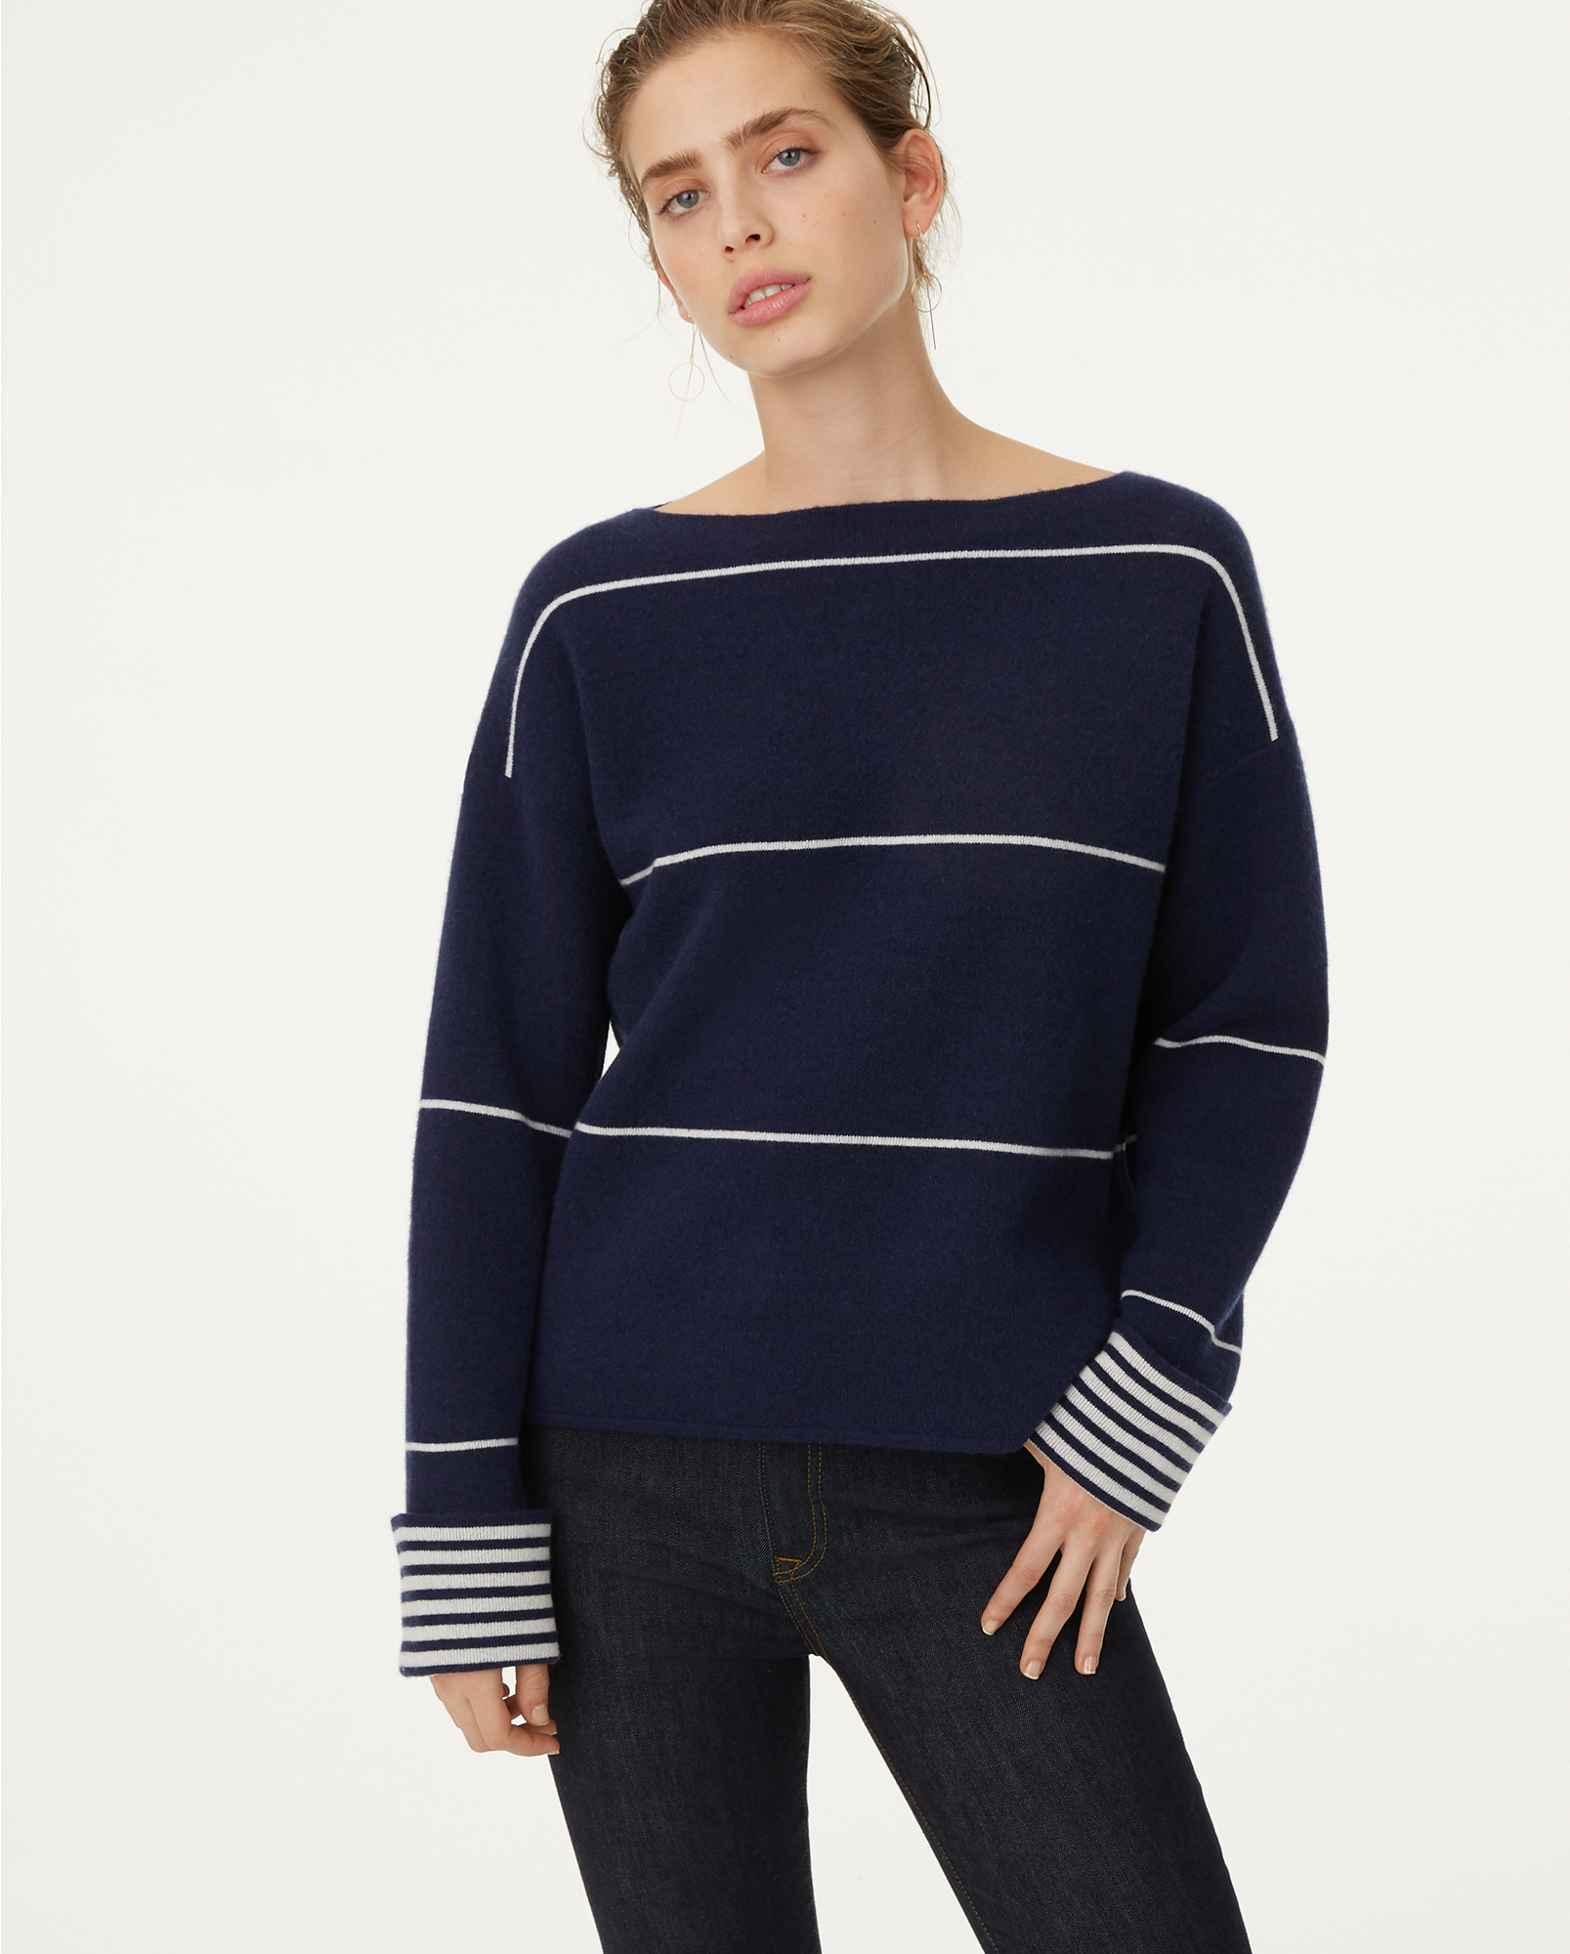 Club Monaco Navy Reversible Cashmere Sweater in Blue - Lyst